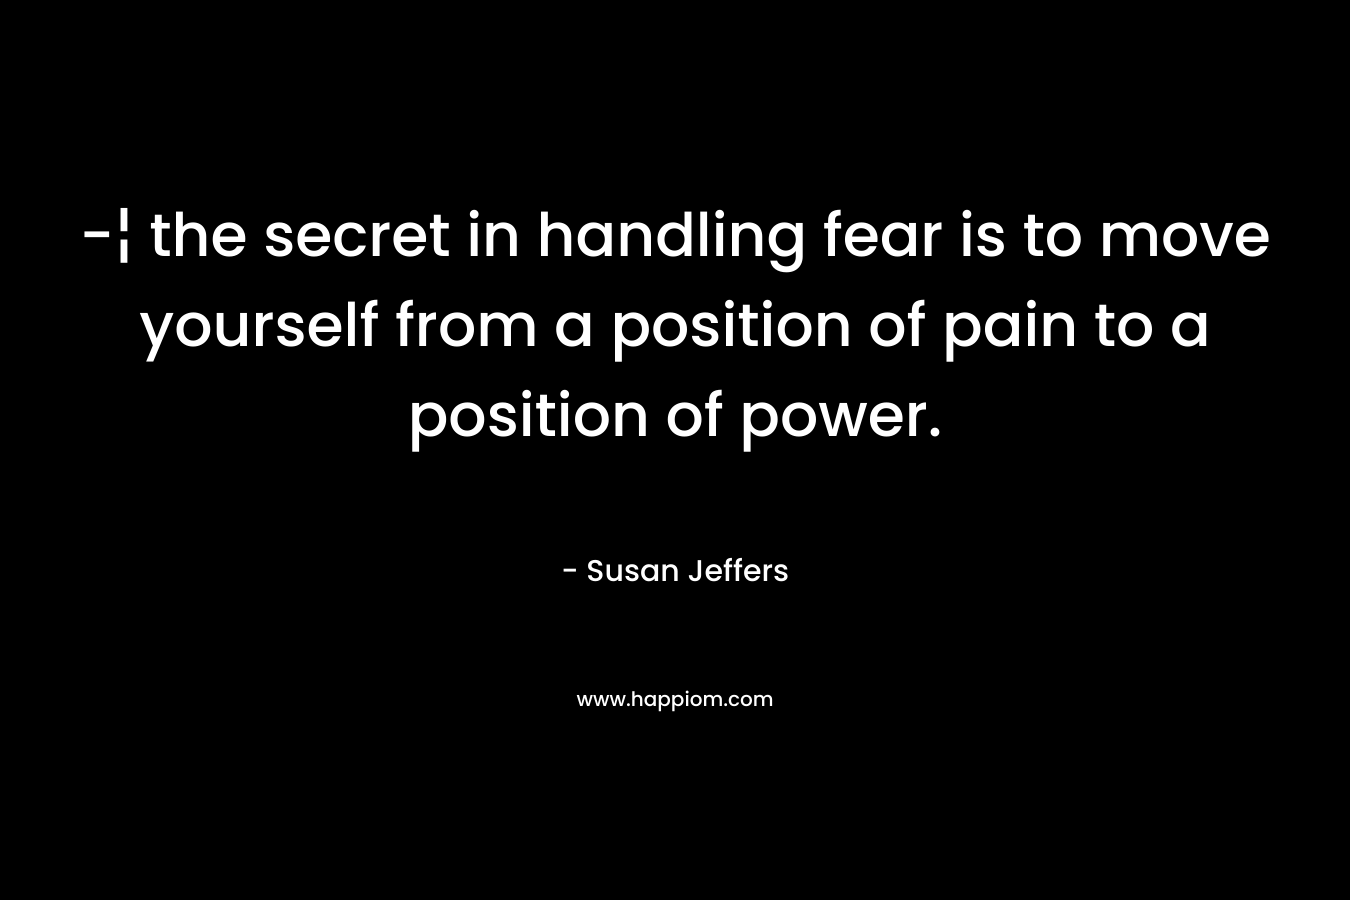 -¦ the secret in handling fear is to move yourself from a position of pain to a position of power.